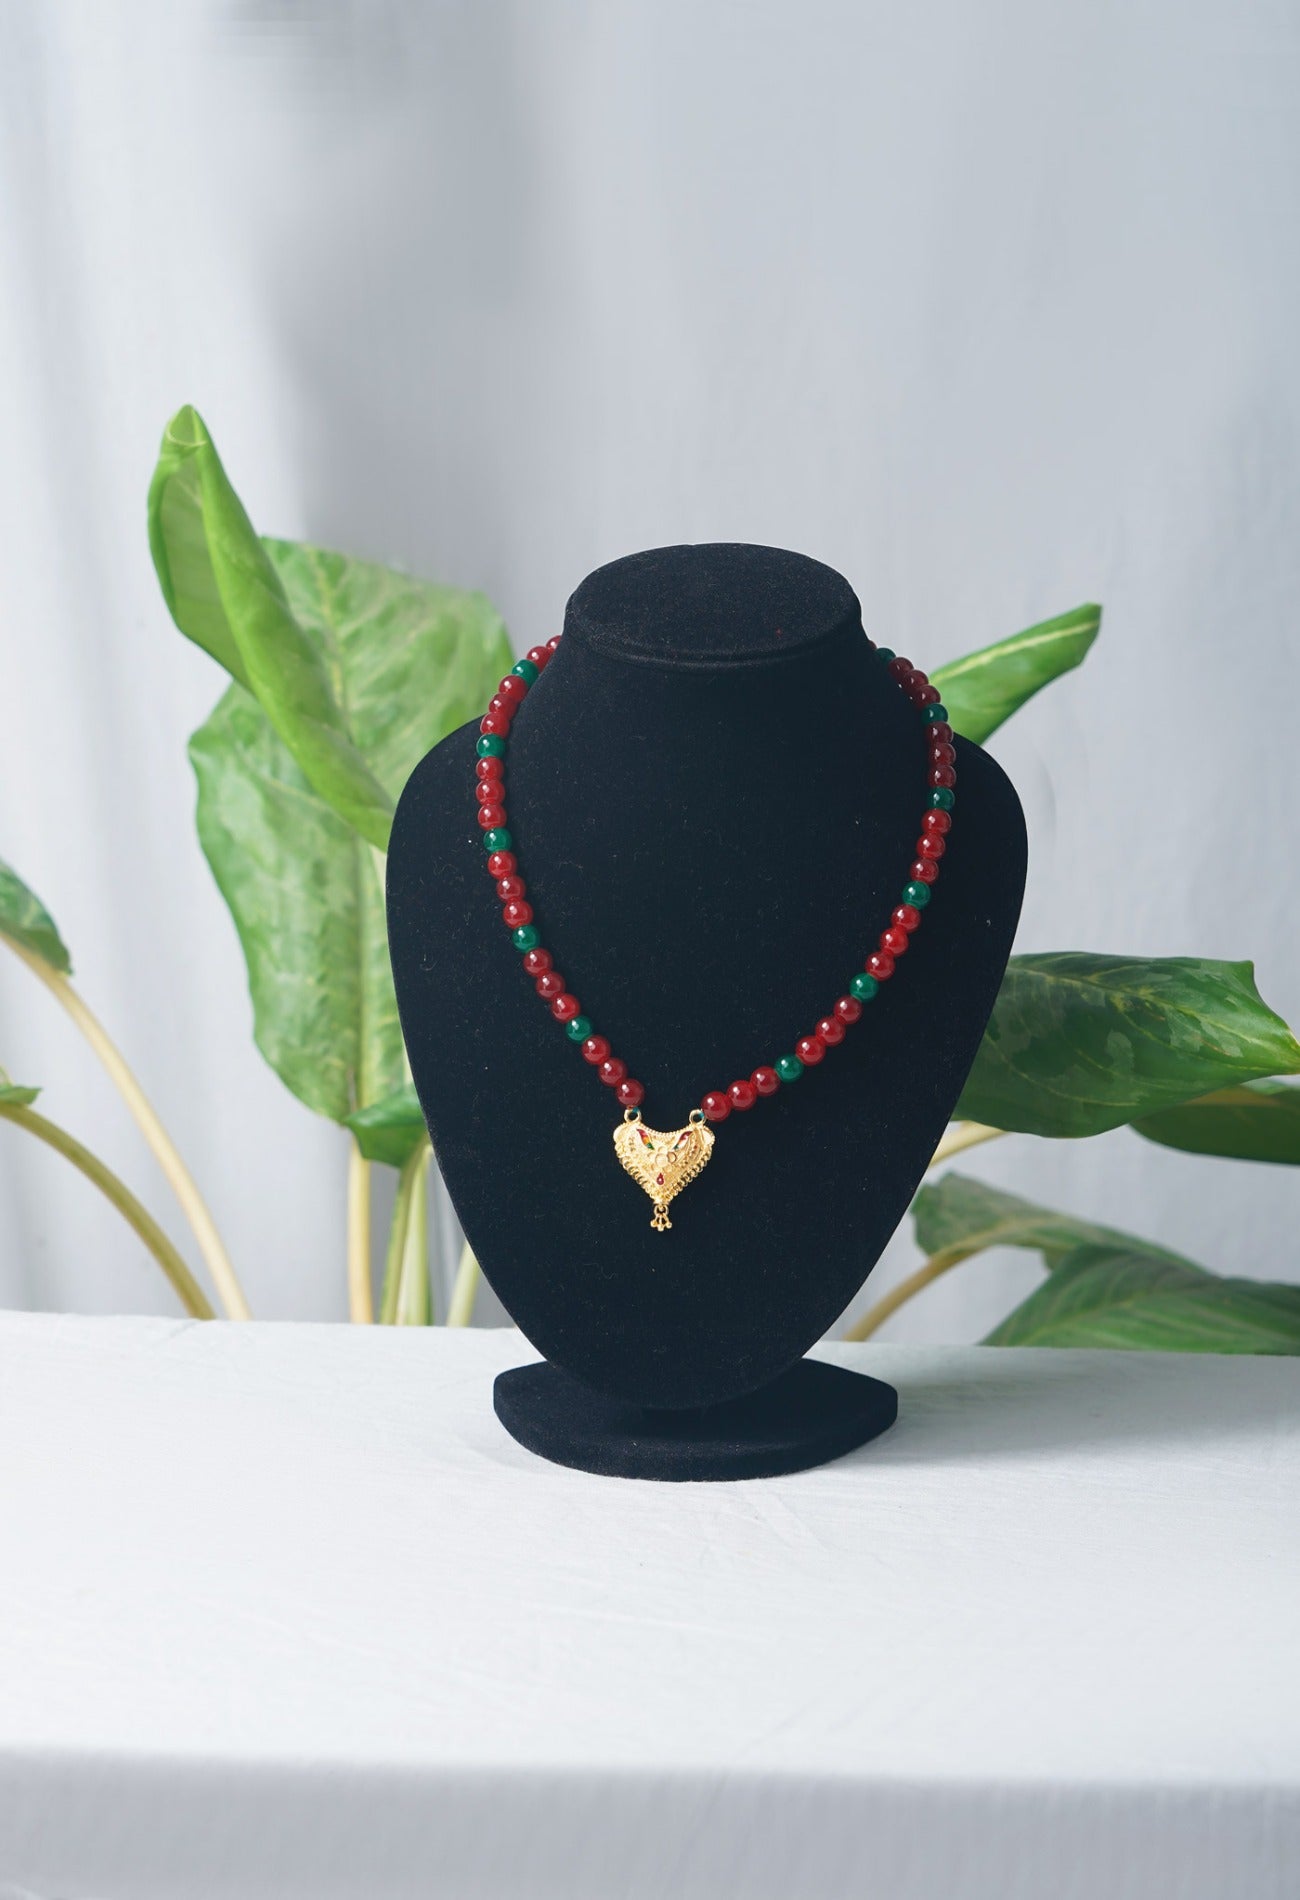 Online Shopping for Red and Green Amravati Round Beads Necklace with Pendent with jewellery from Andhra pradesh at Unnatisilks.com India
